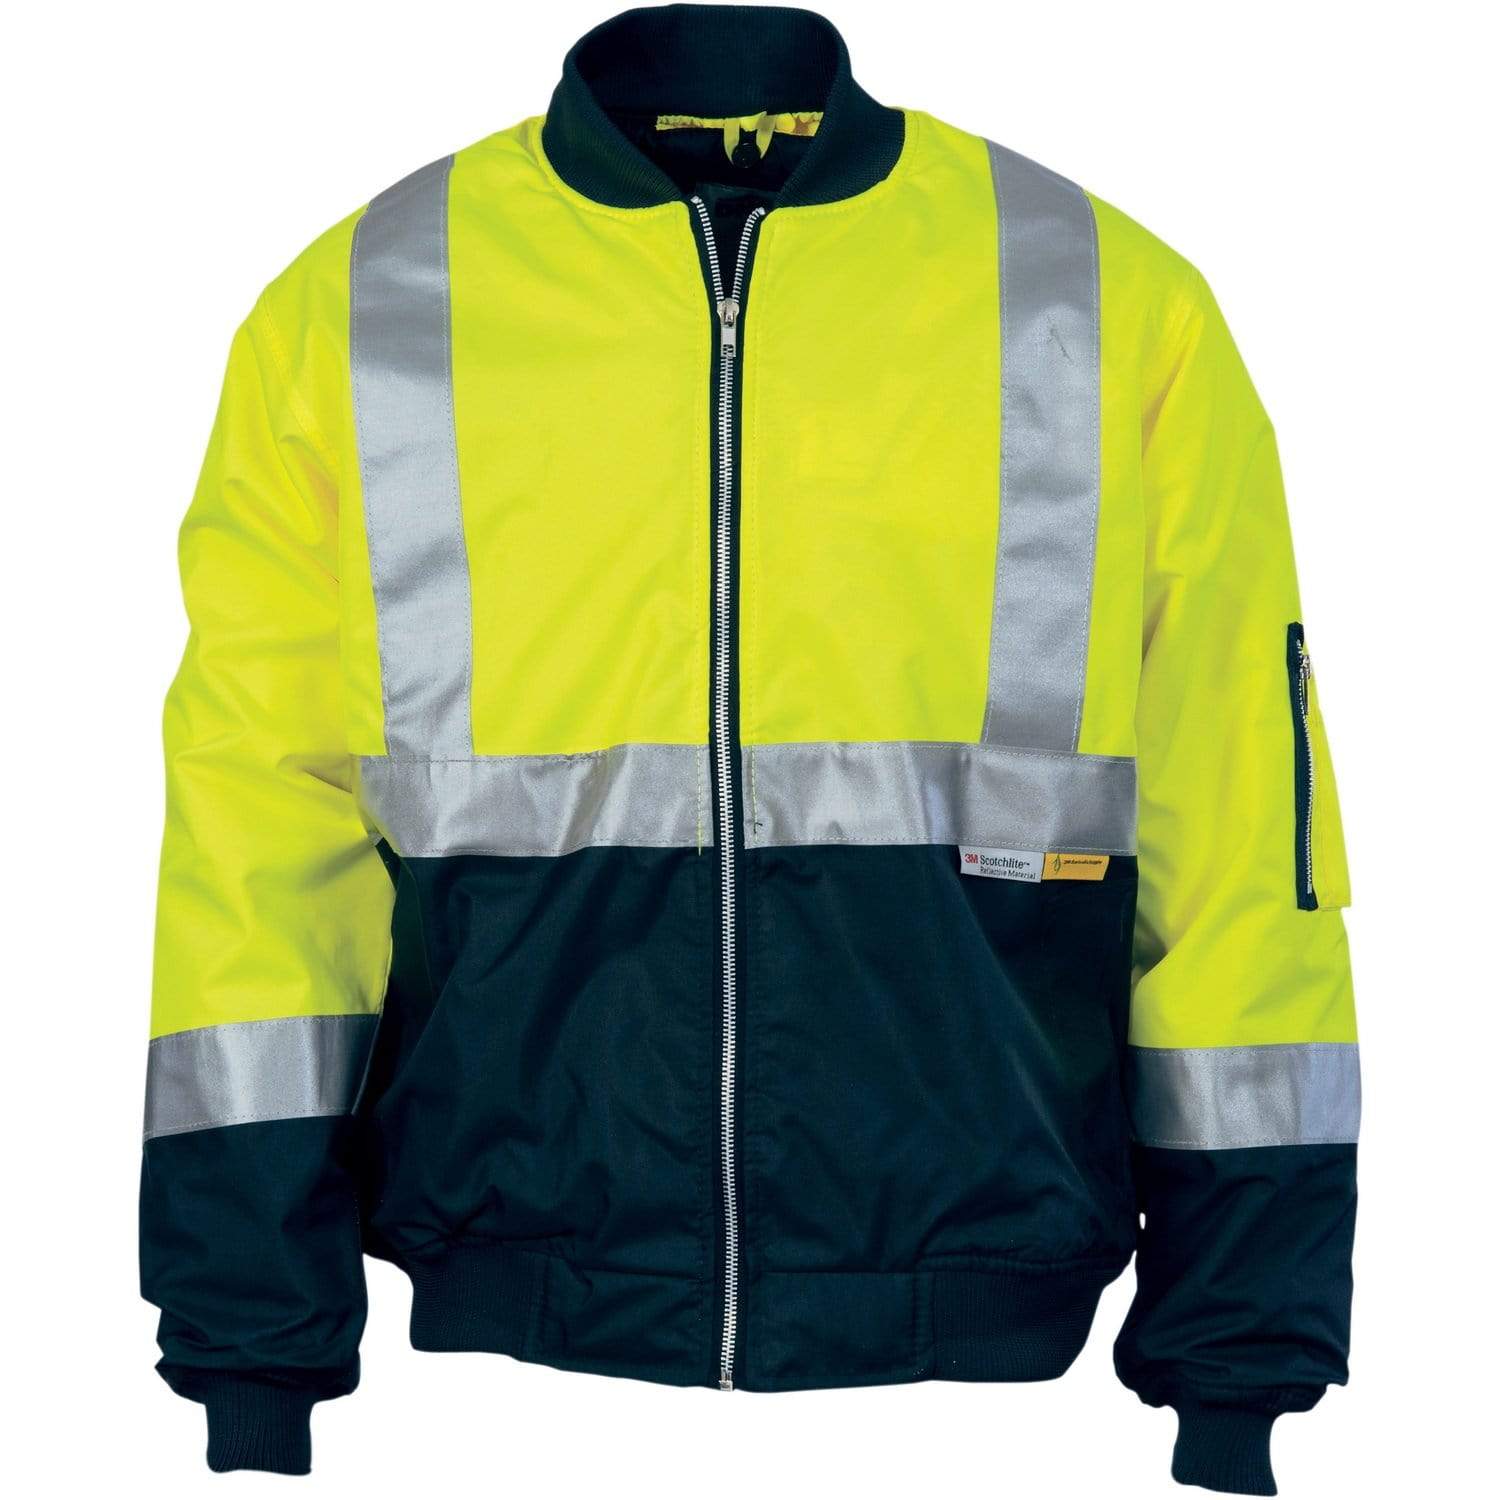 Reflective Safety Jacket - Cold Room